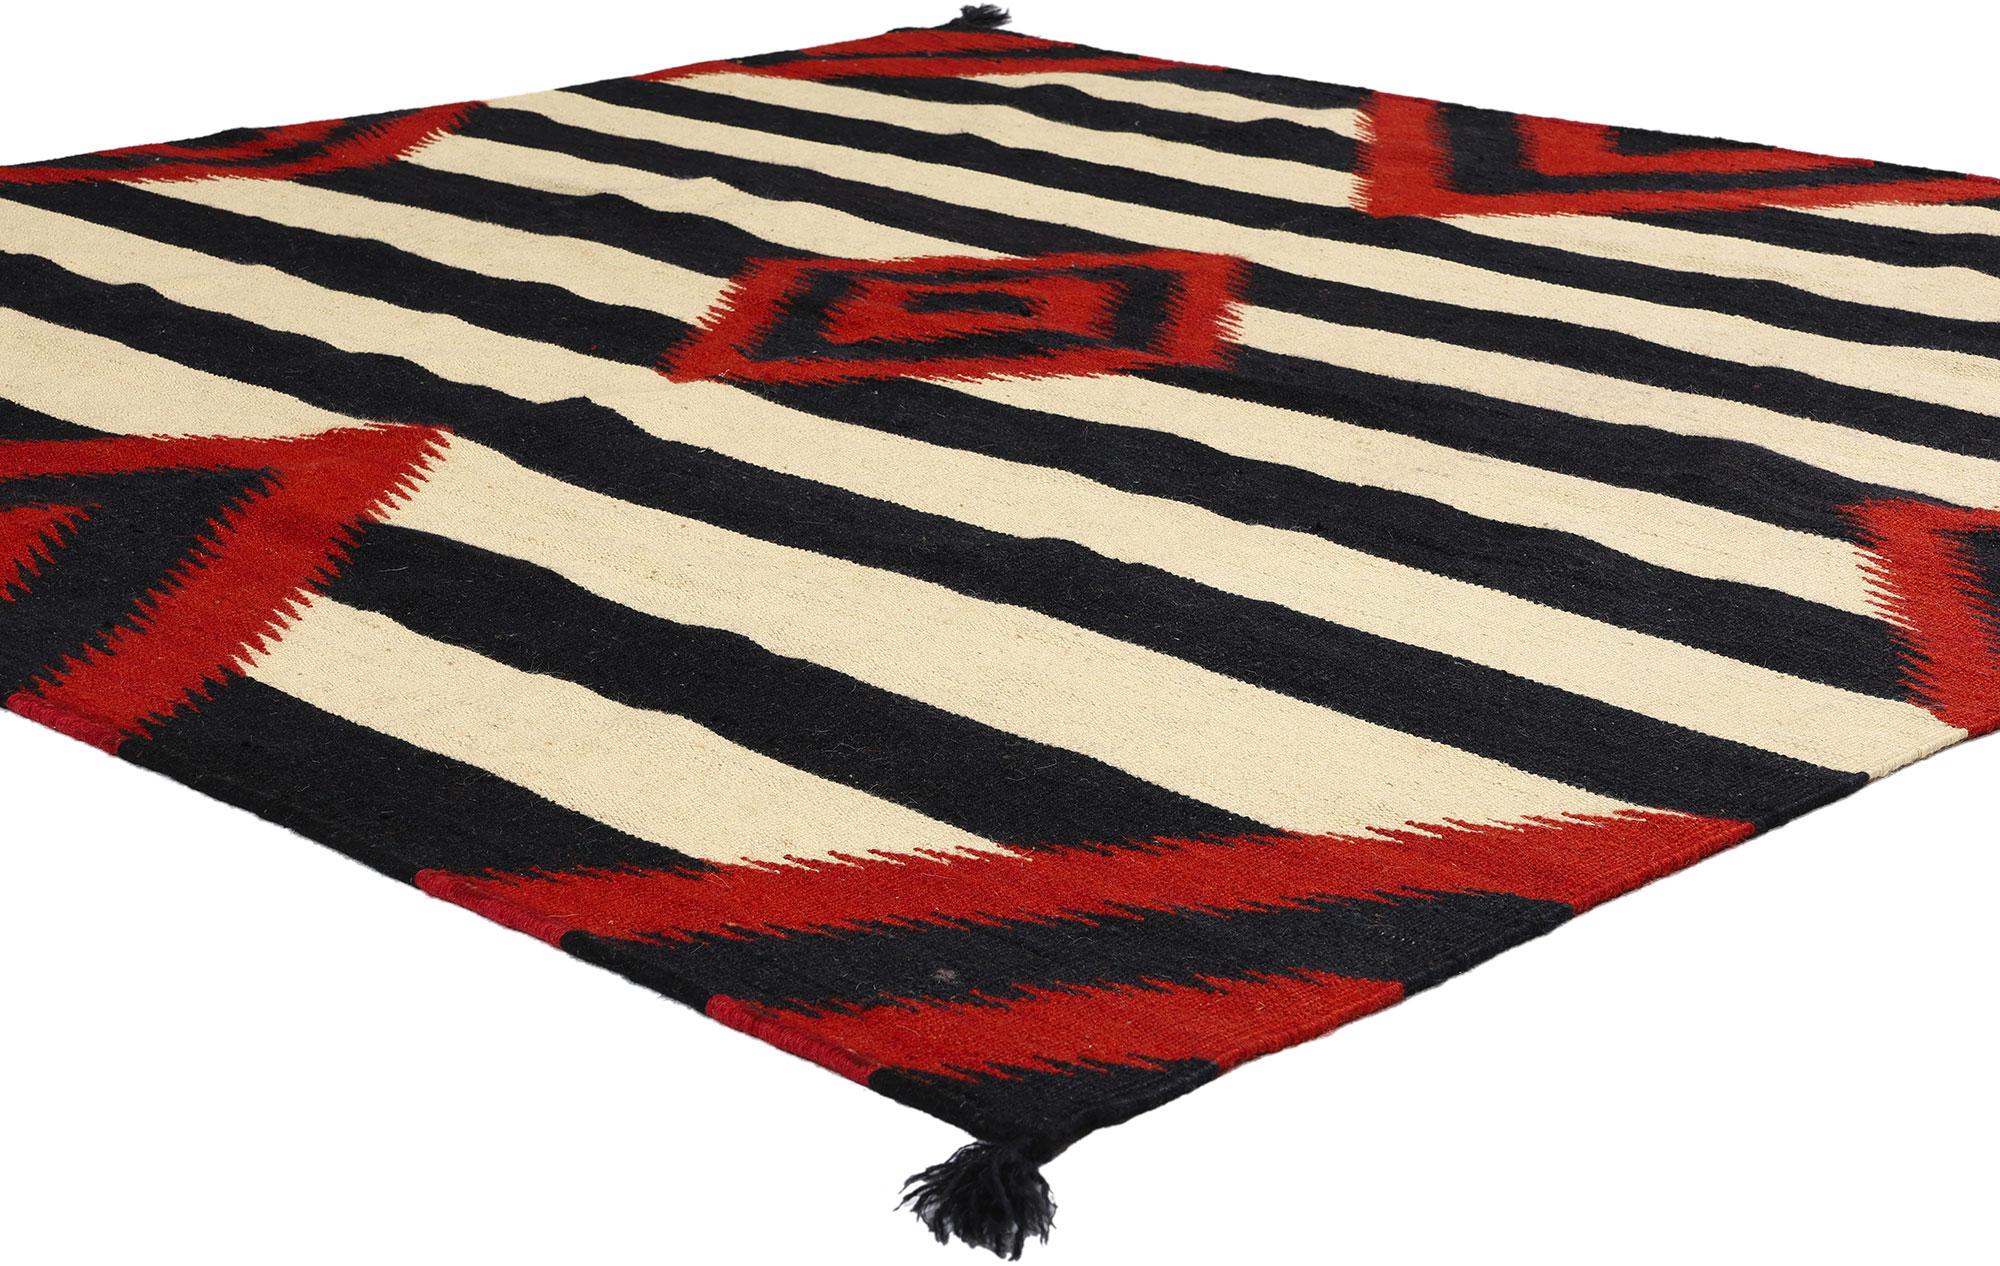 81046 Southwest Modern Chief Blanket Navajo-Style Rug, 06'03 x 05'11. Embark on an enchanting journey immersed in sunbaked warmth with this handwoven wool Chief Blanket Navajo-style rug. A testament to the seamless fusion of Contemporary Santa Fe